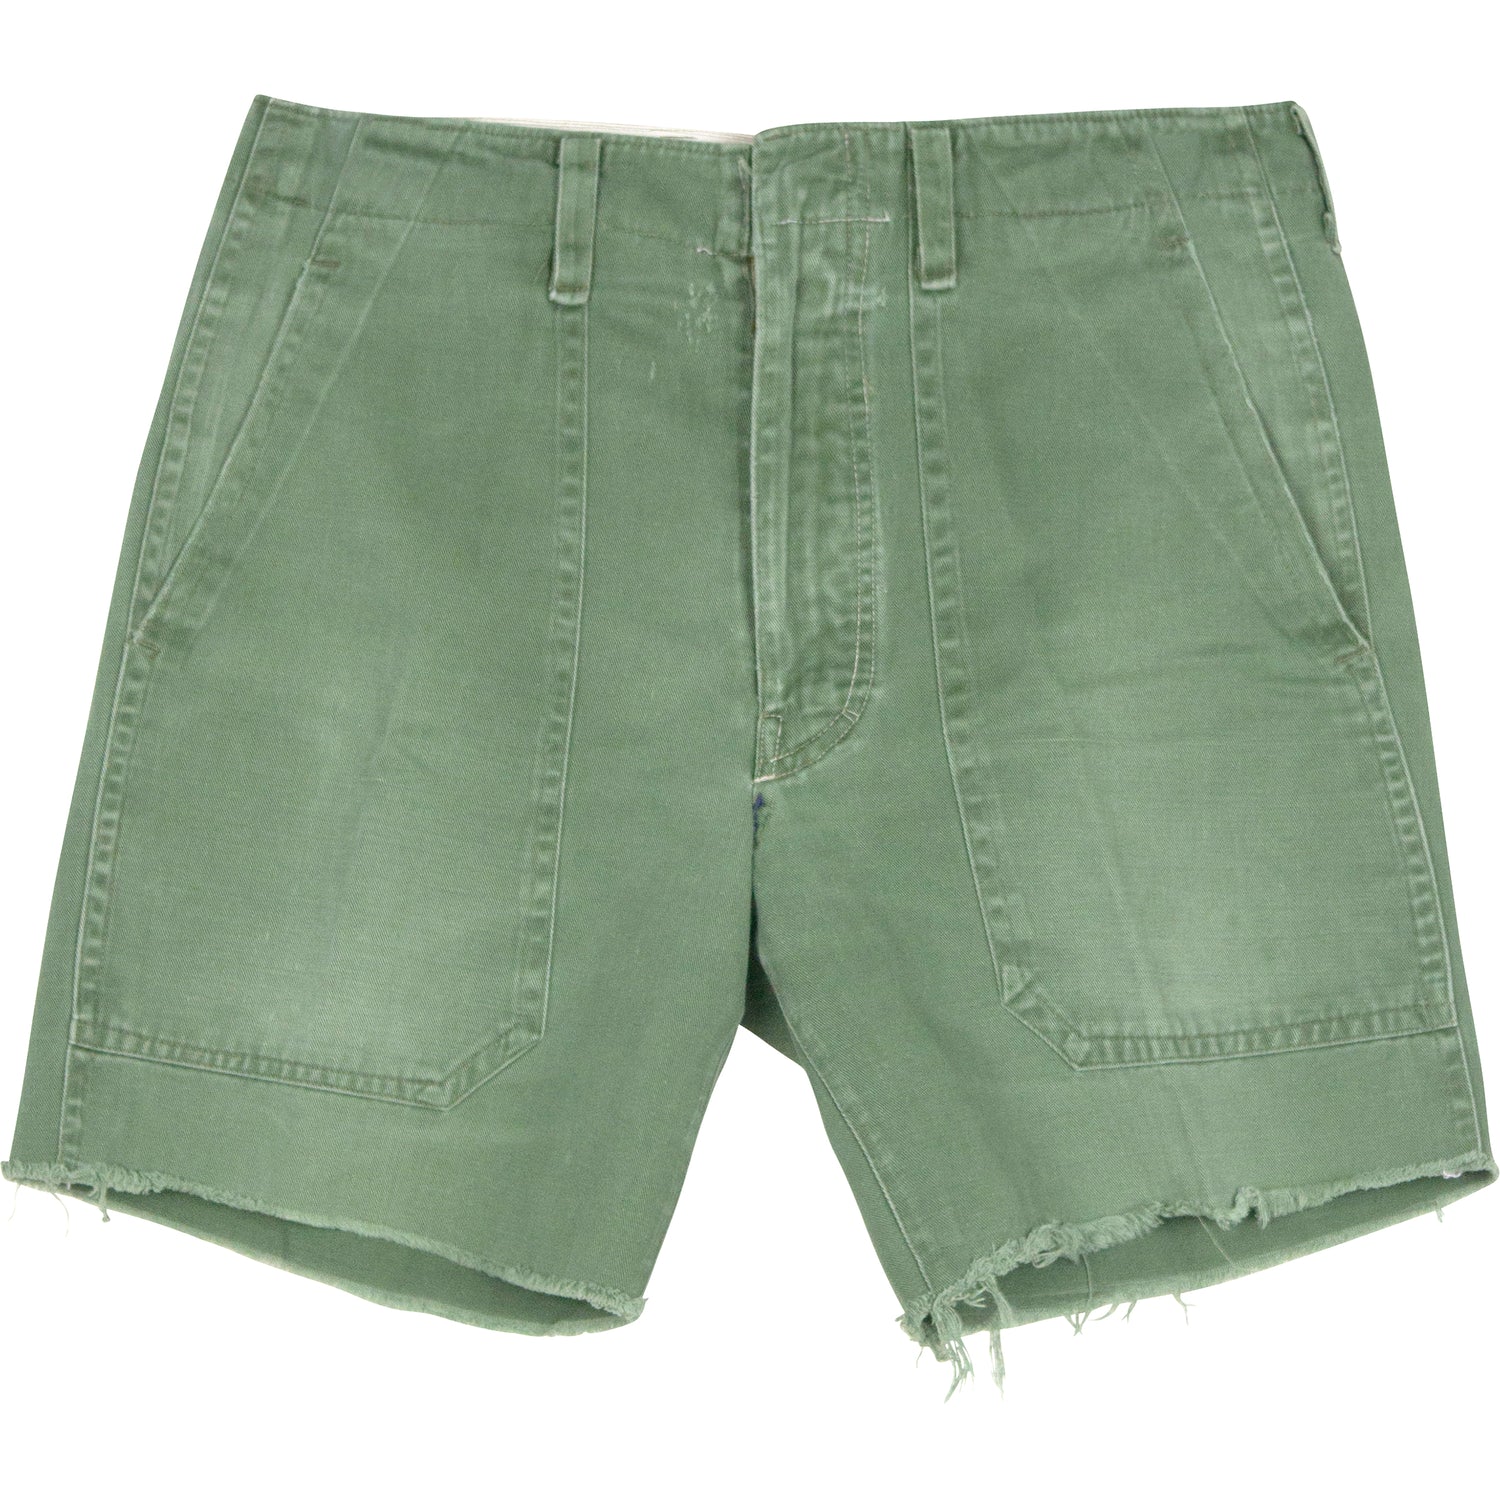 VINTAGE ARMY CUT-OFF SHORTS - SIZE 29